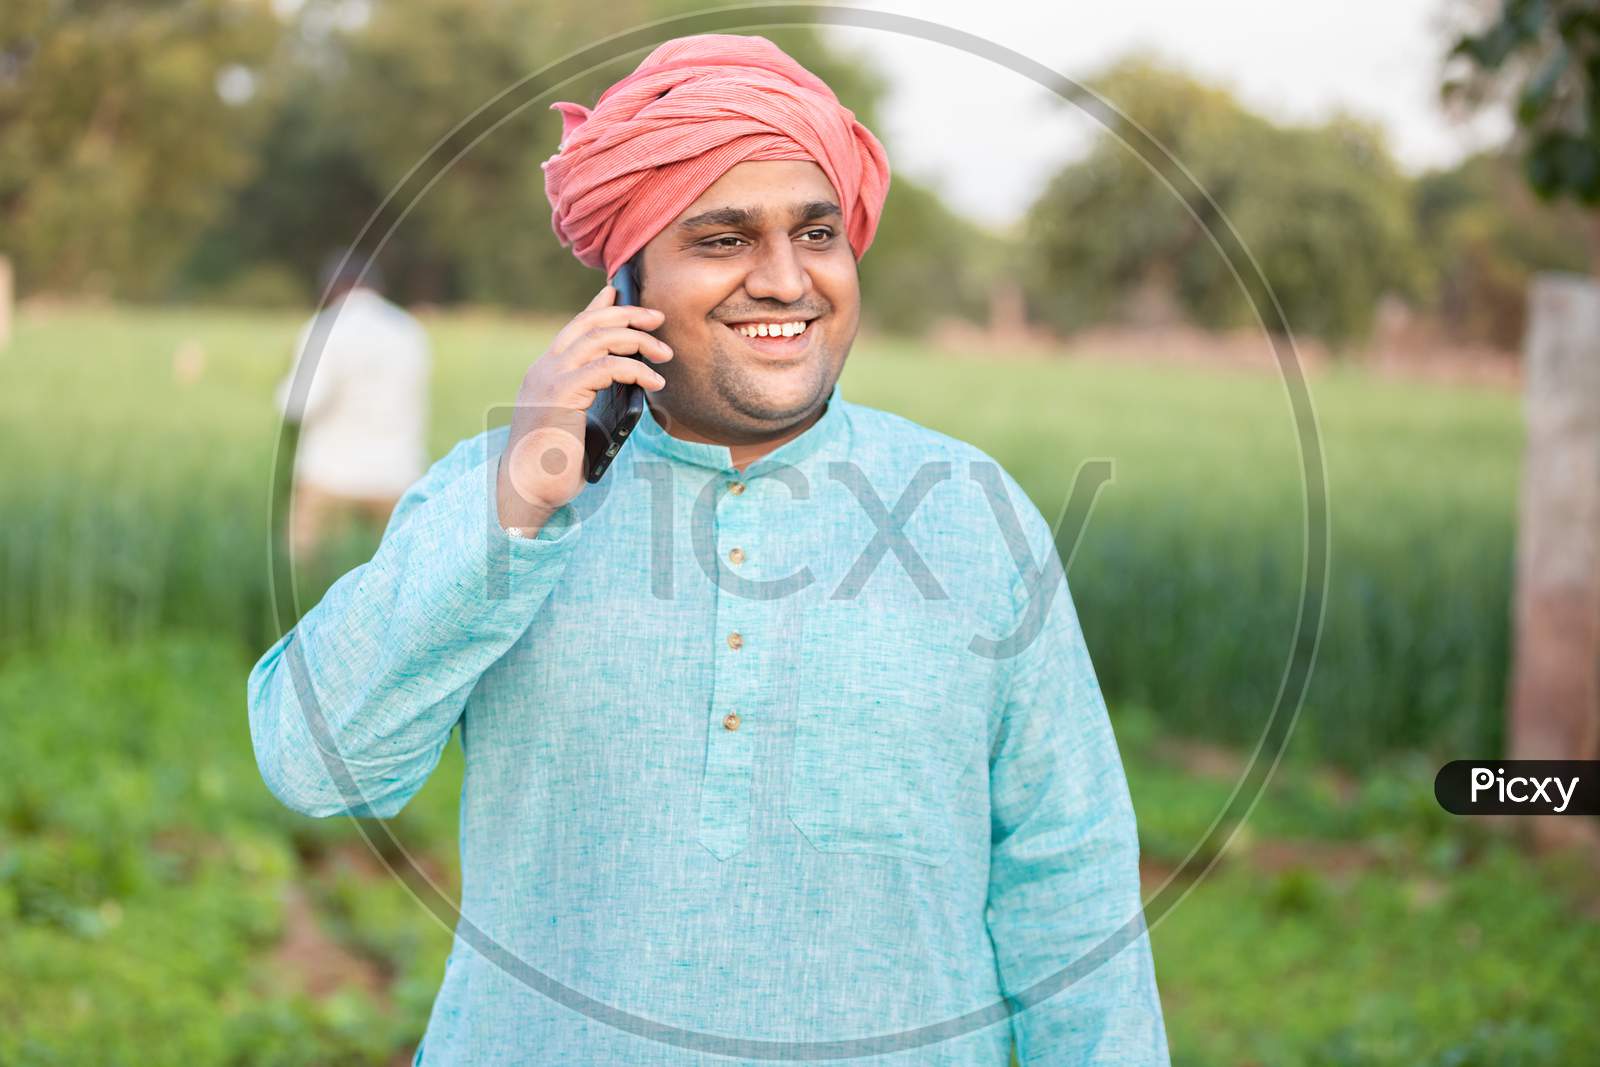 Young Happy Indian Farmer Worker Talking On Phone While Standing In Green Field, Agriculture And Technology Concept, Male Wearing Traditional Kurta Outfit, Copy Space To Write Text.